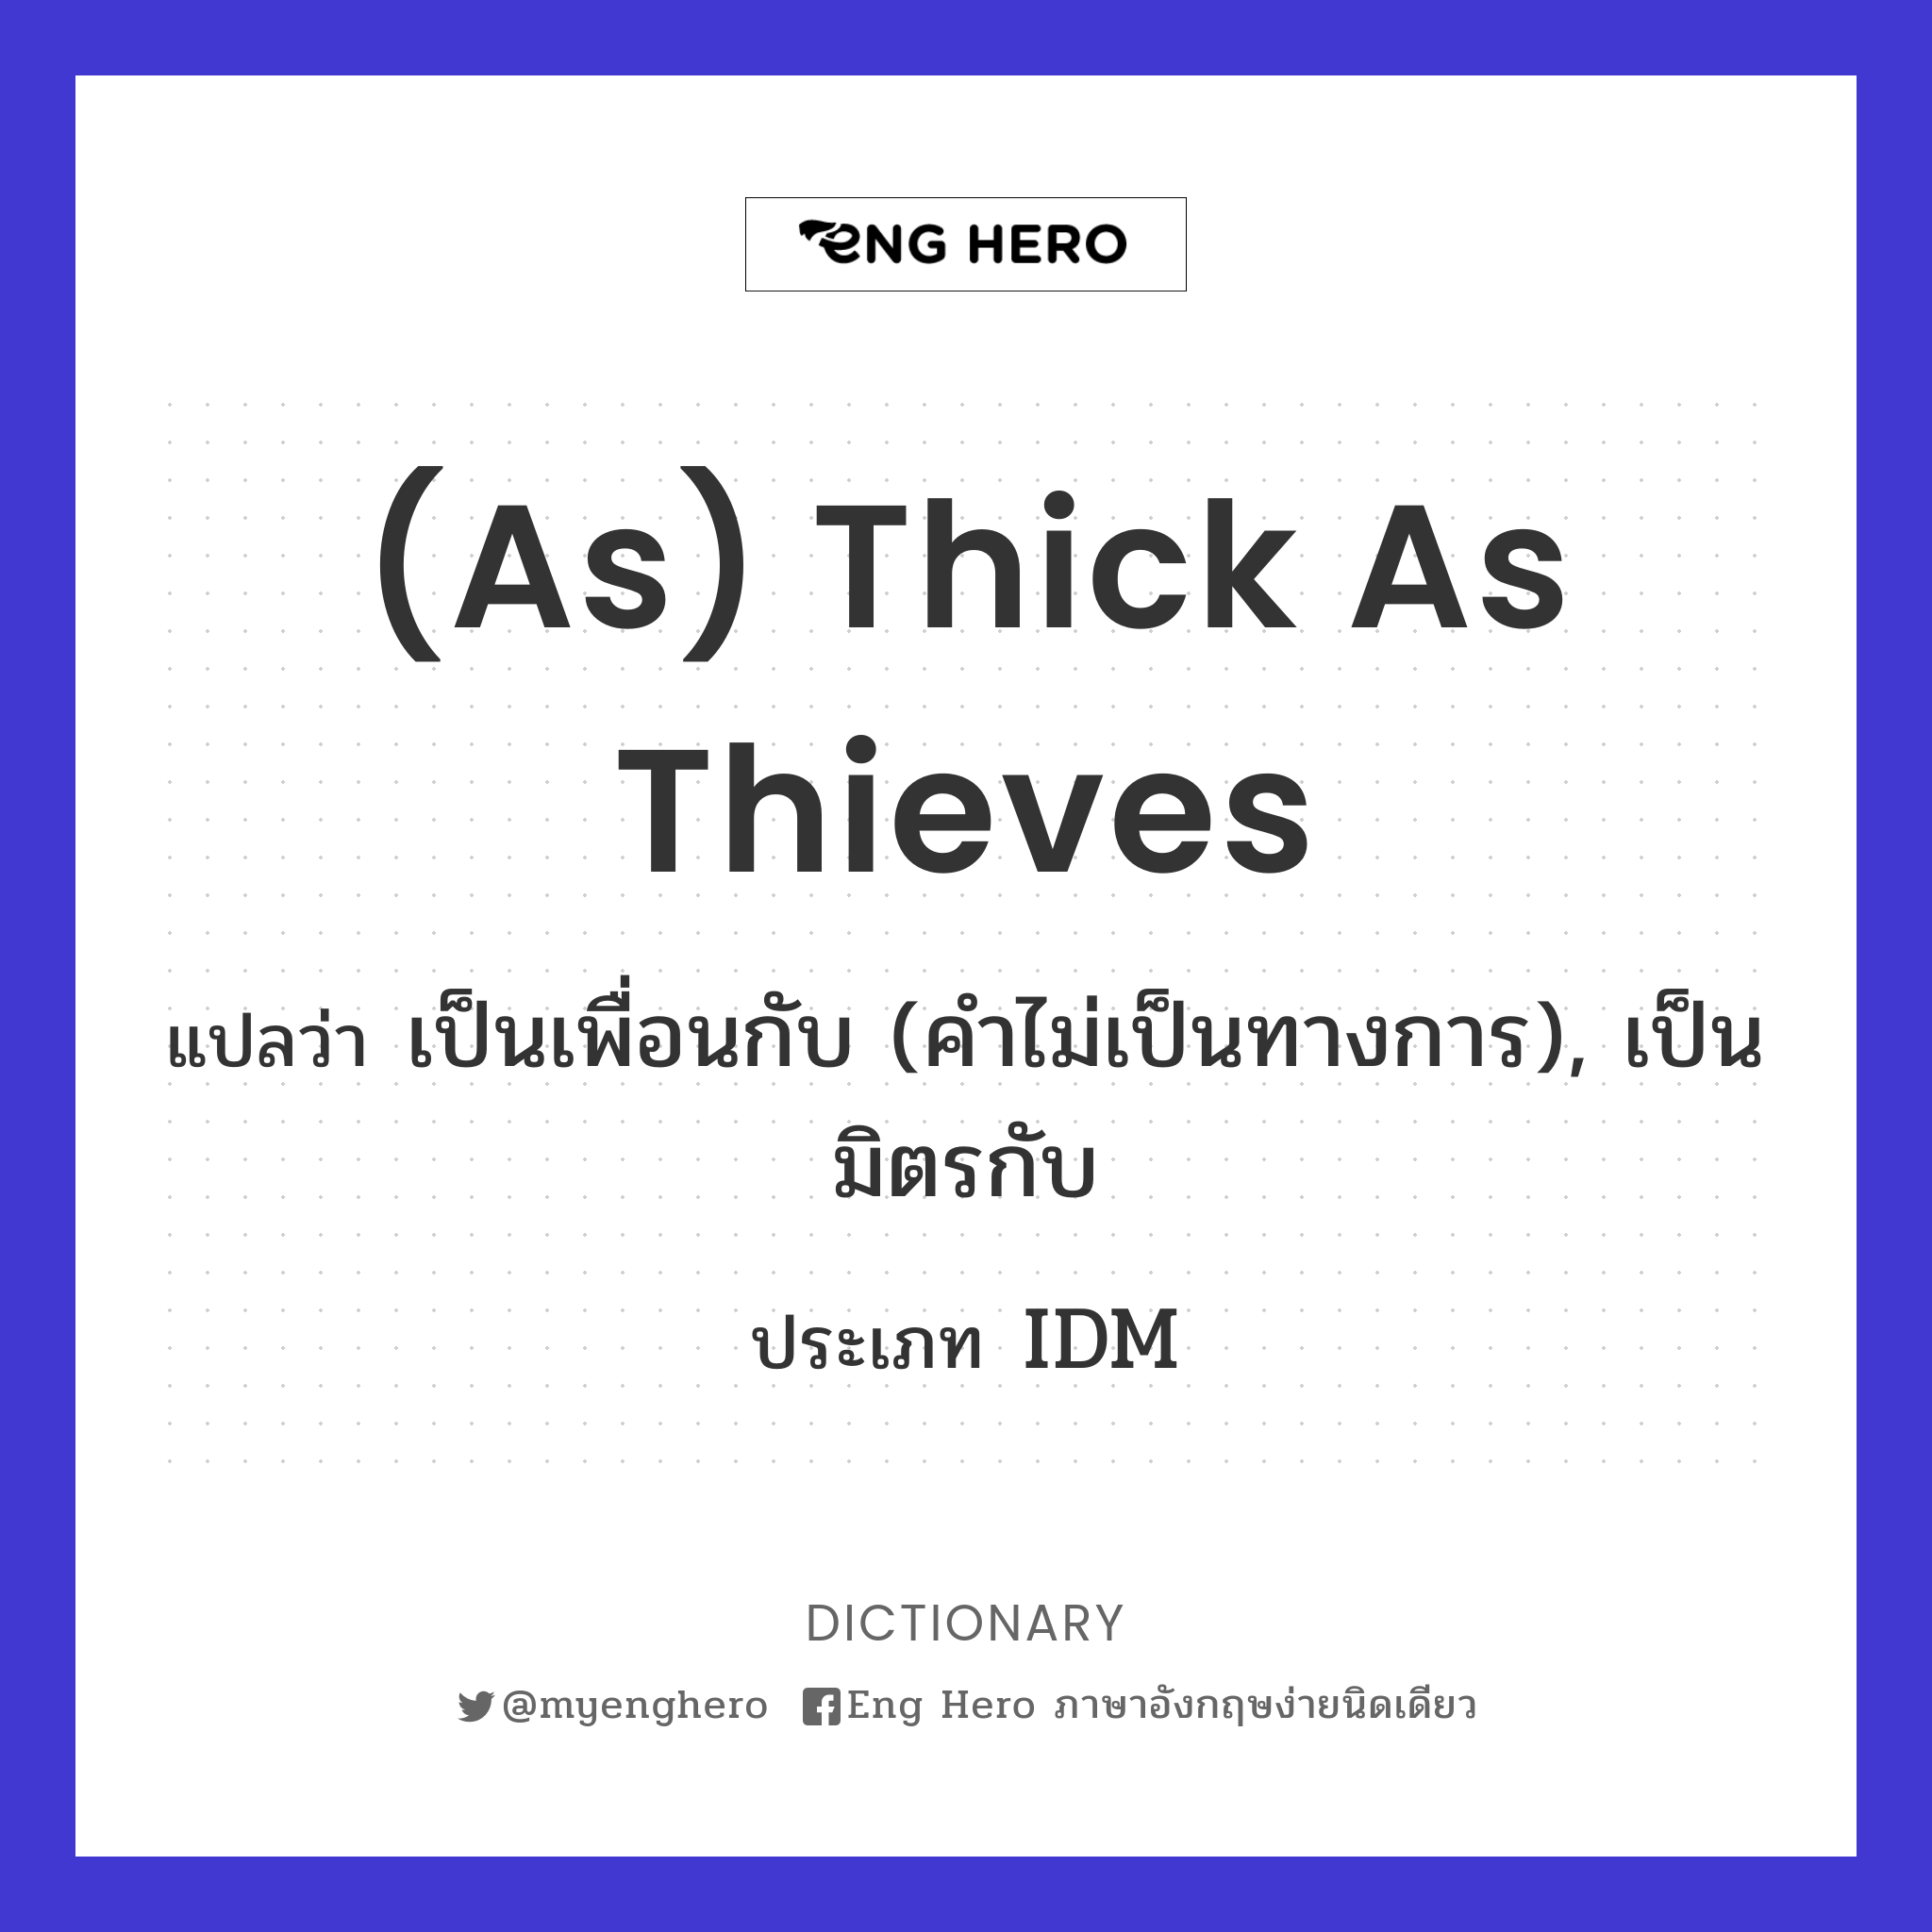 (as) thick as thieves